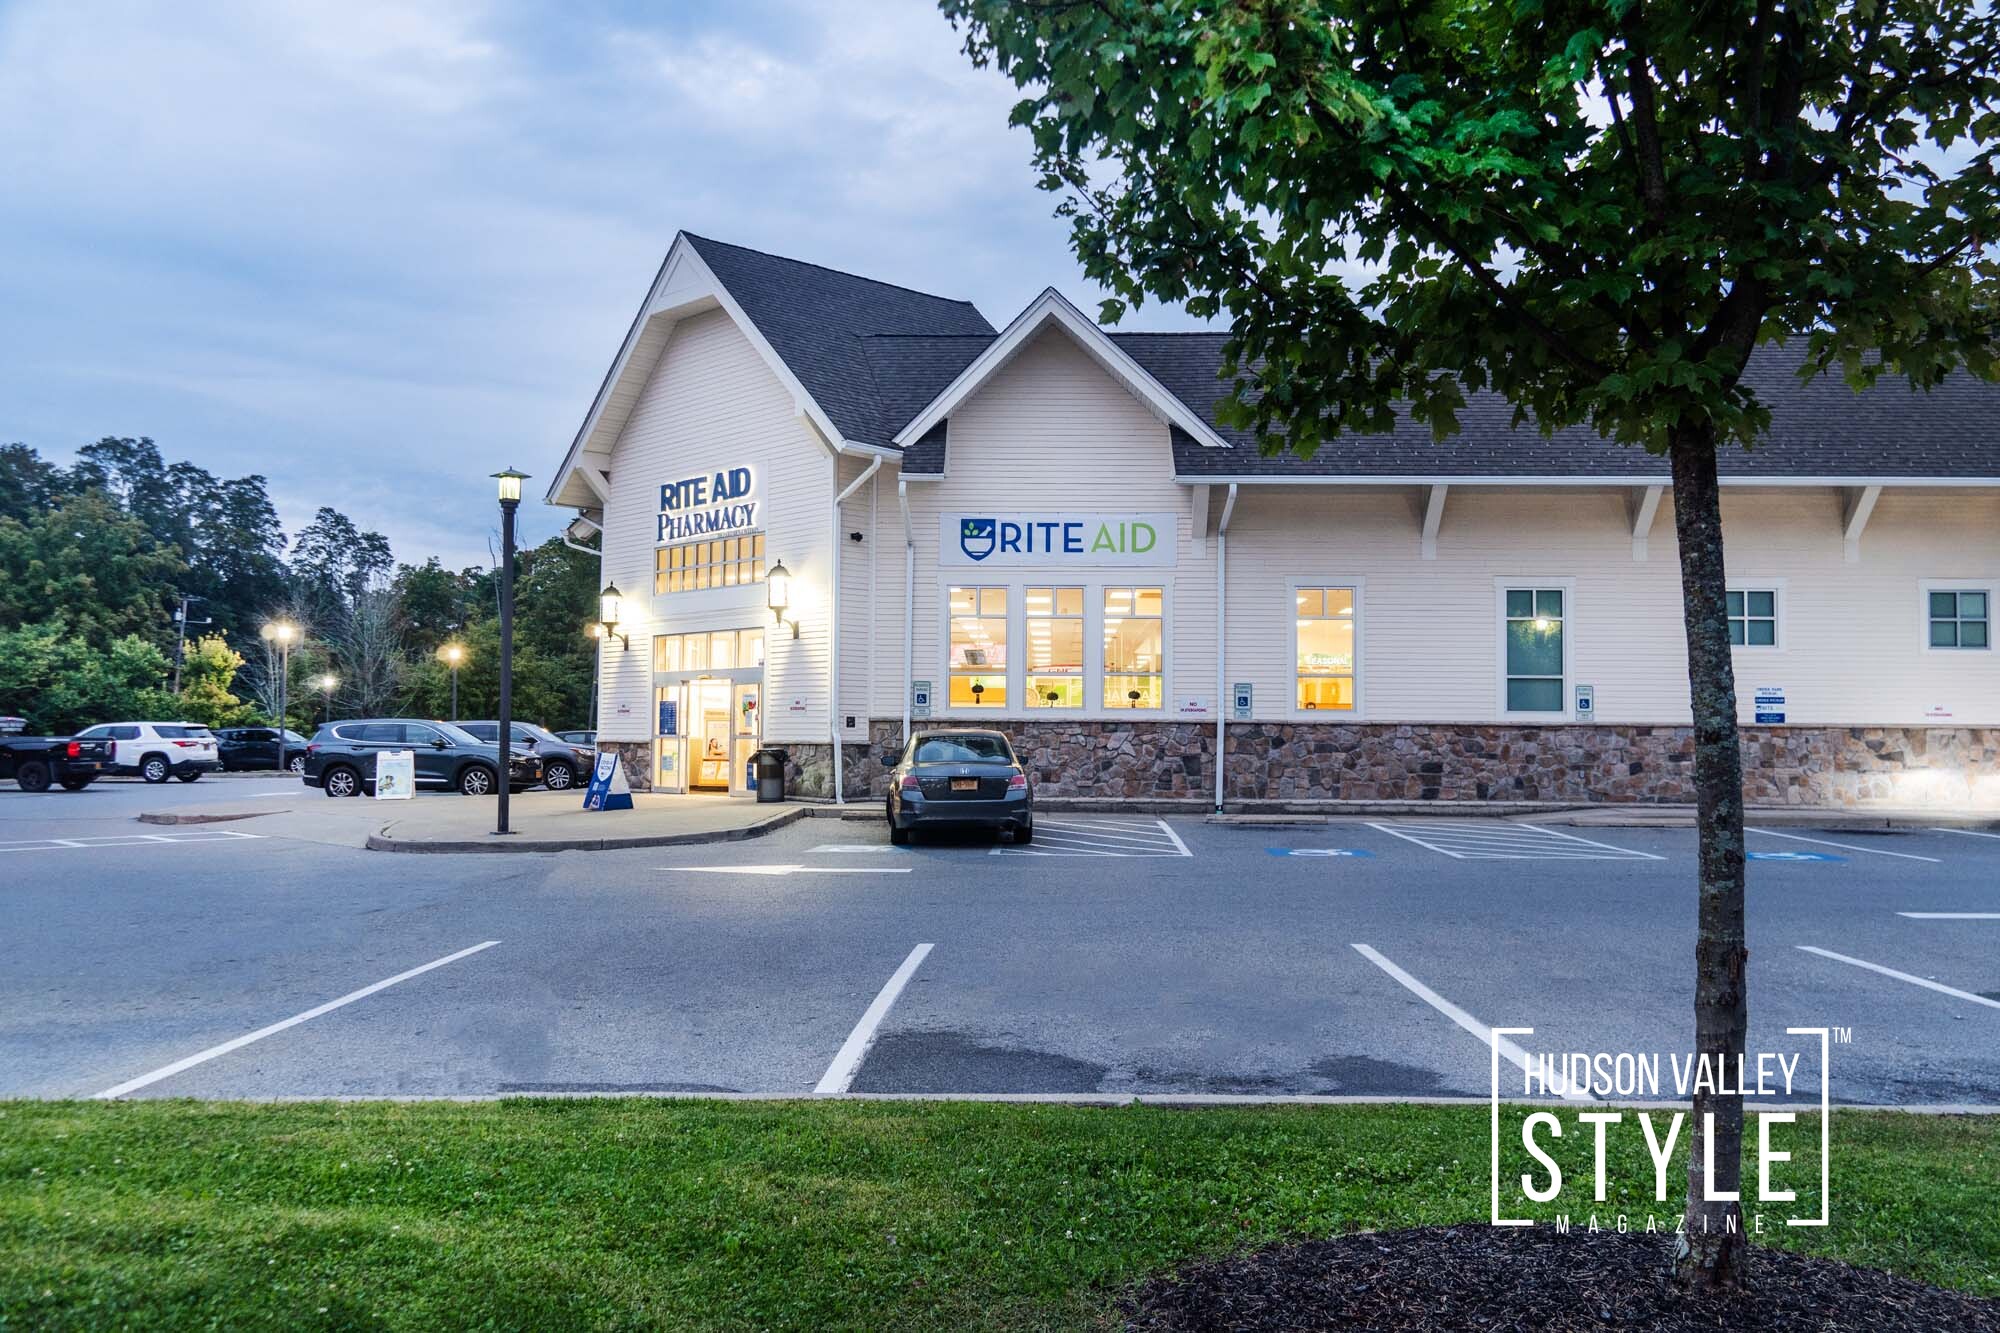 Rite Aid Hudson Valley - Twilight Photography - Commercial Real Estate Photography Project by Duncan Avenue Studios - Hudson Valley, Catskills and Westchester, New York